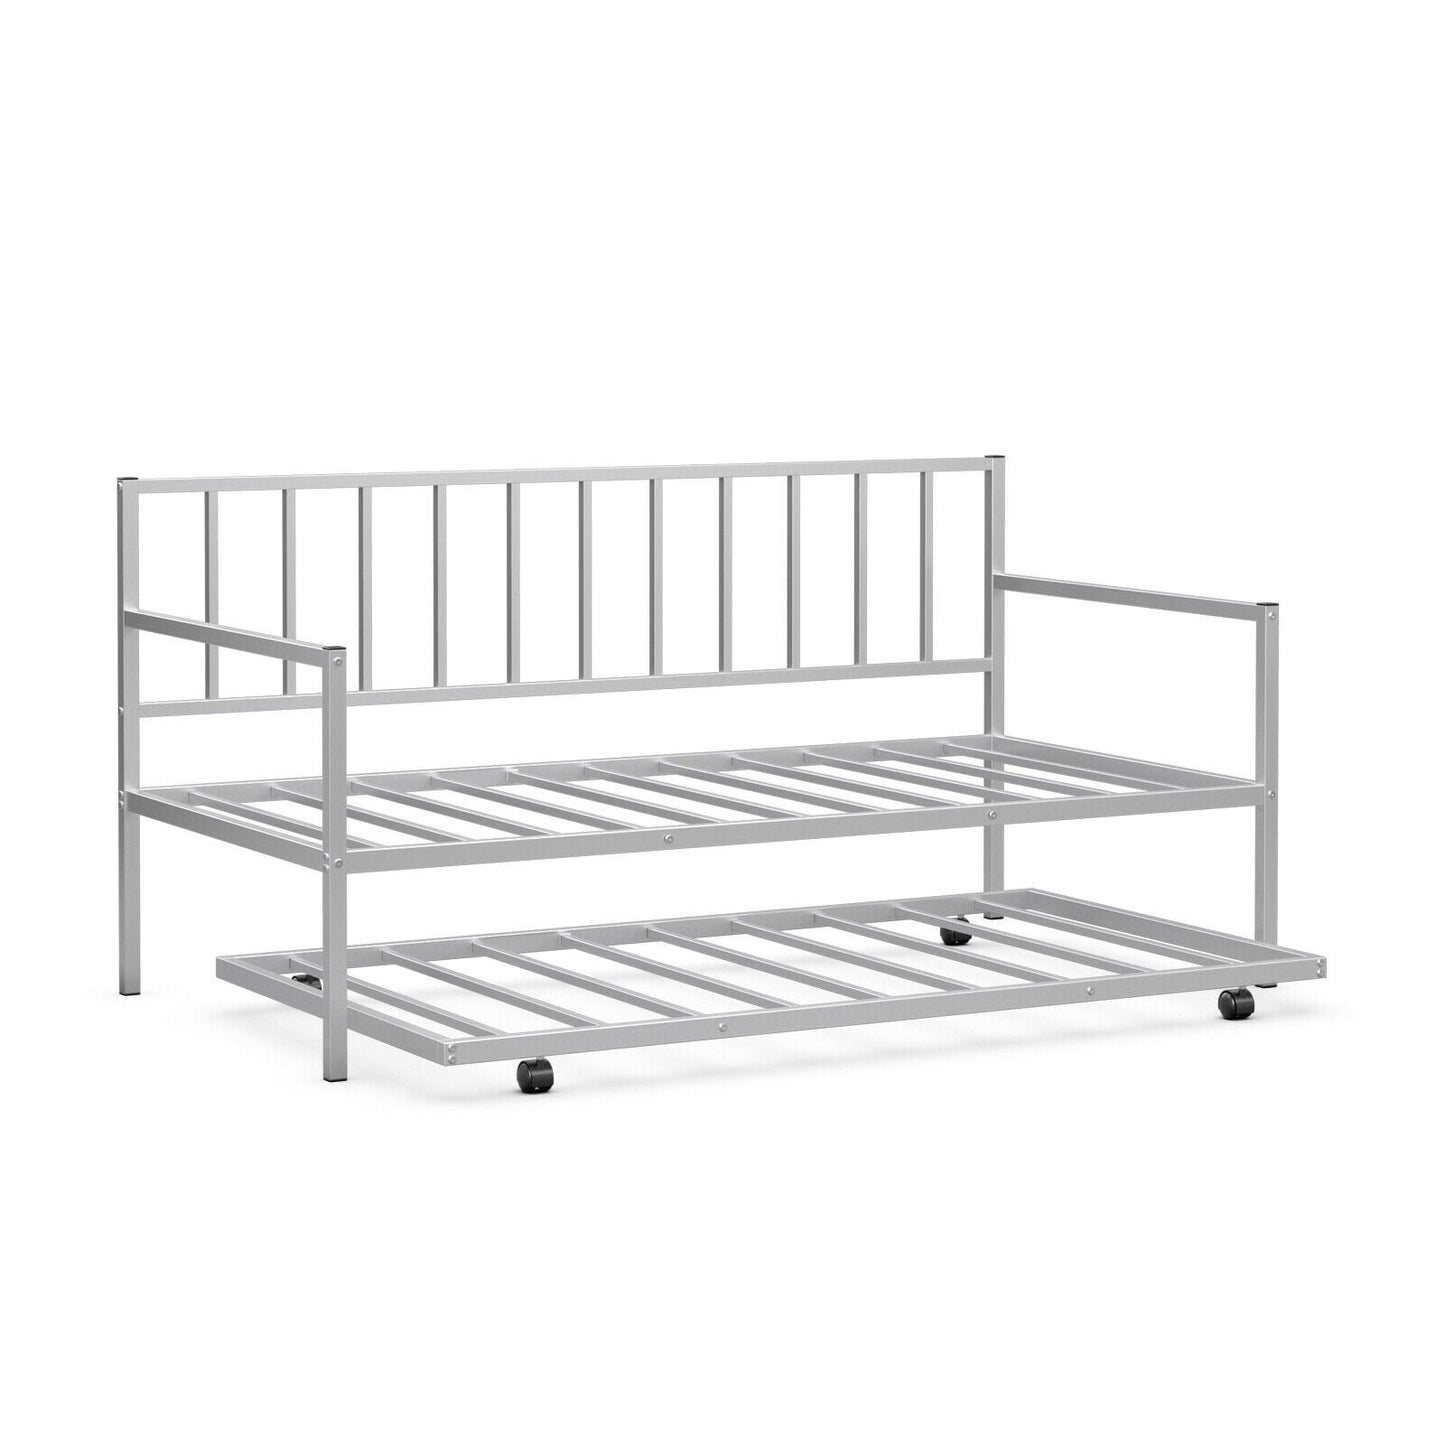 Twin Metal Daybed Sofa Bed Set with Roll Out Trundle, Silver